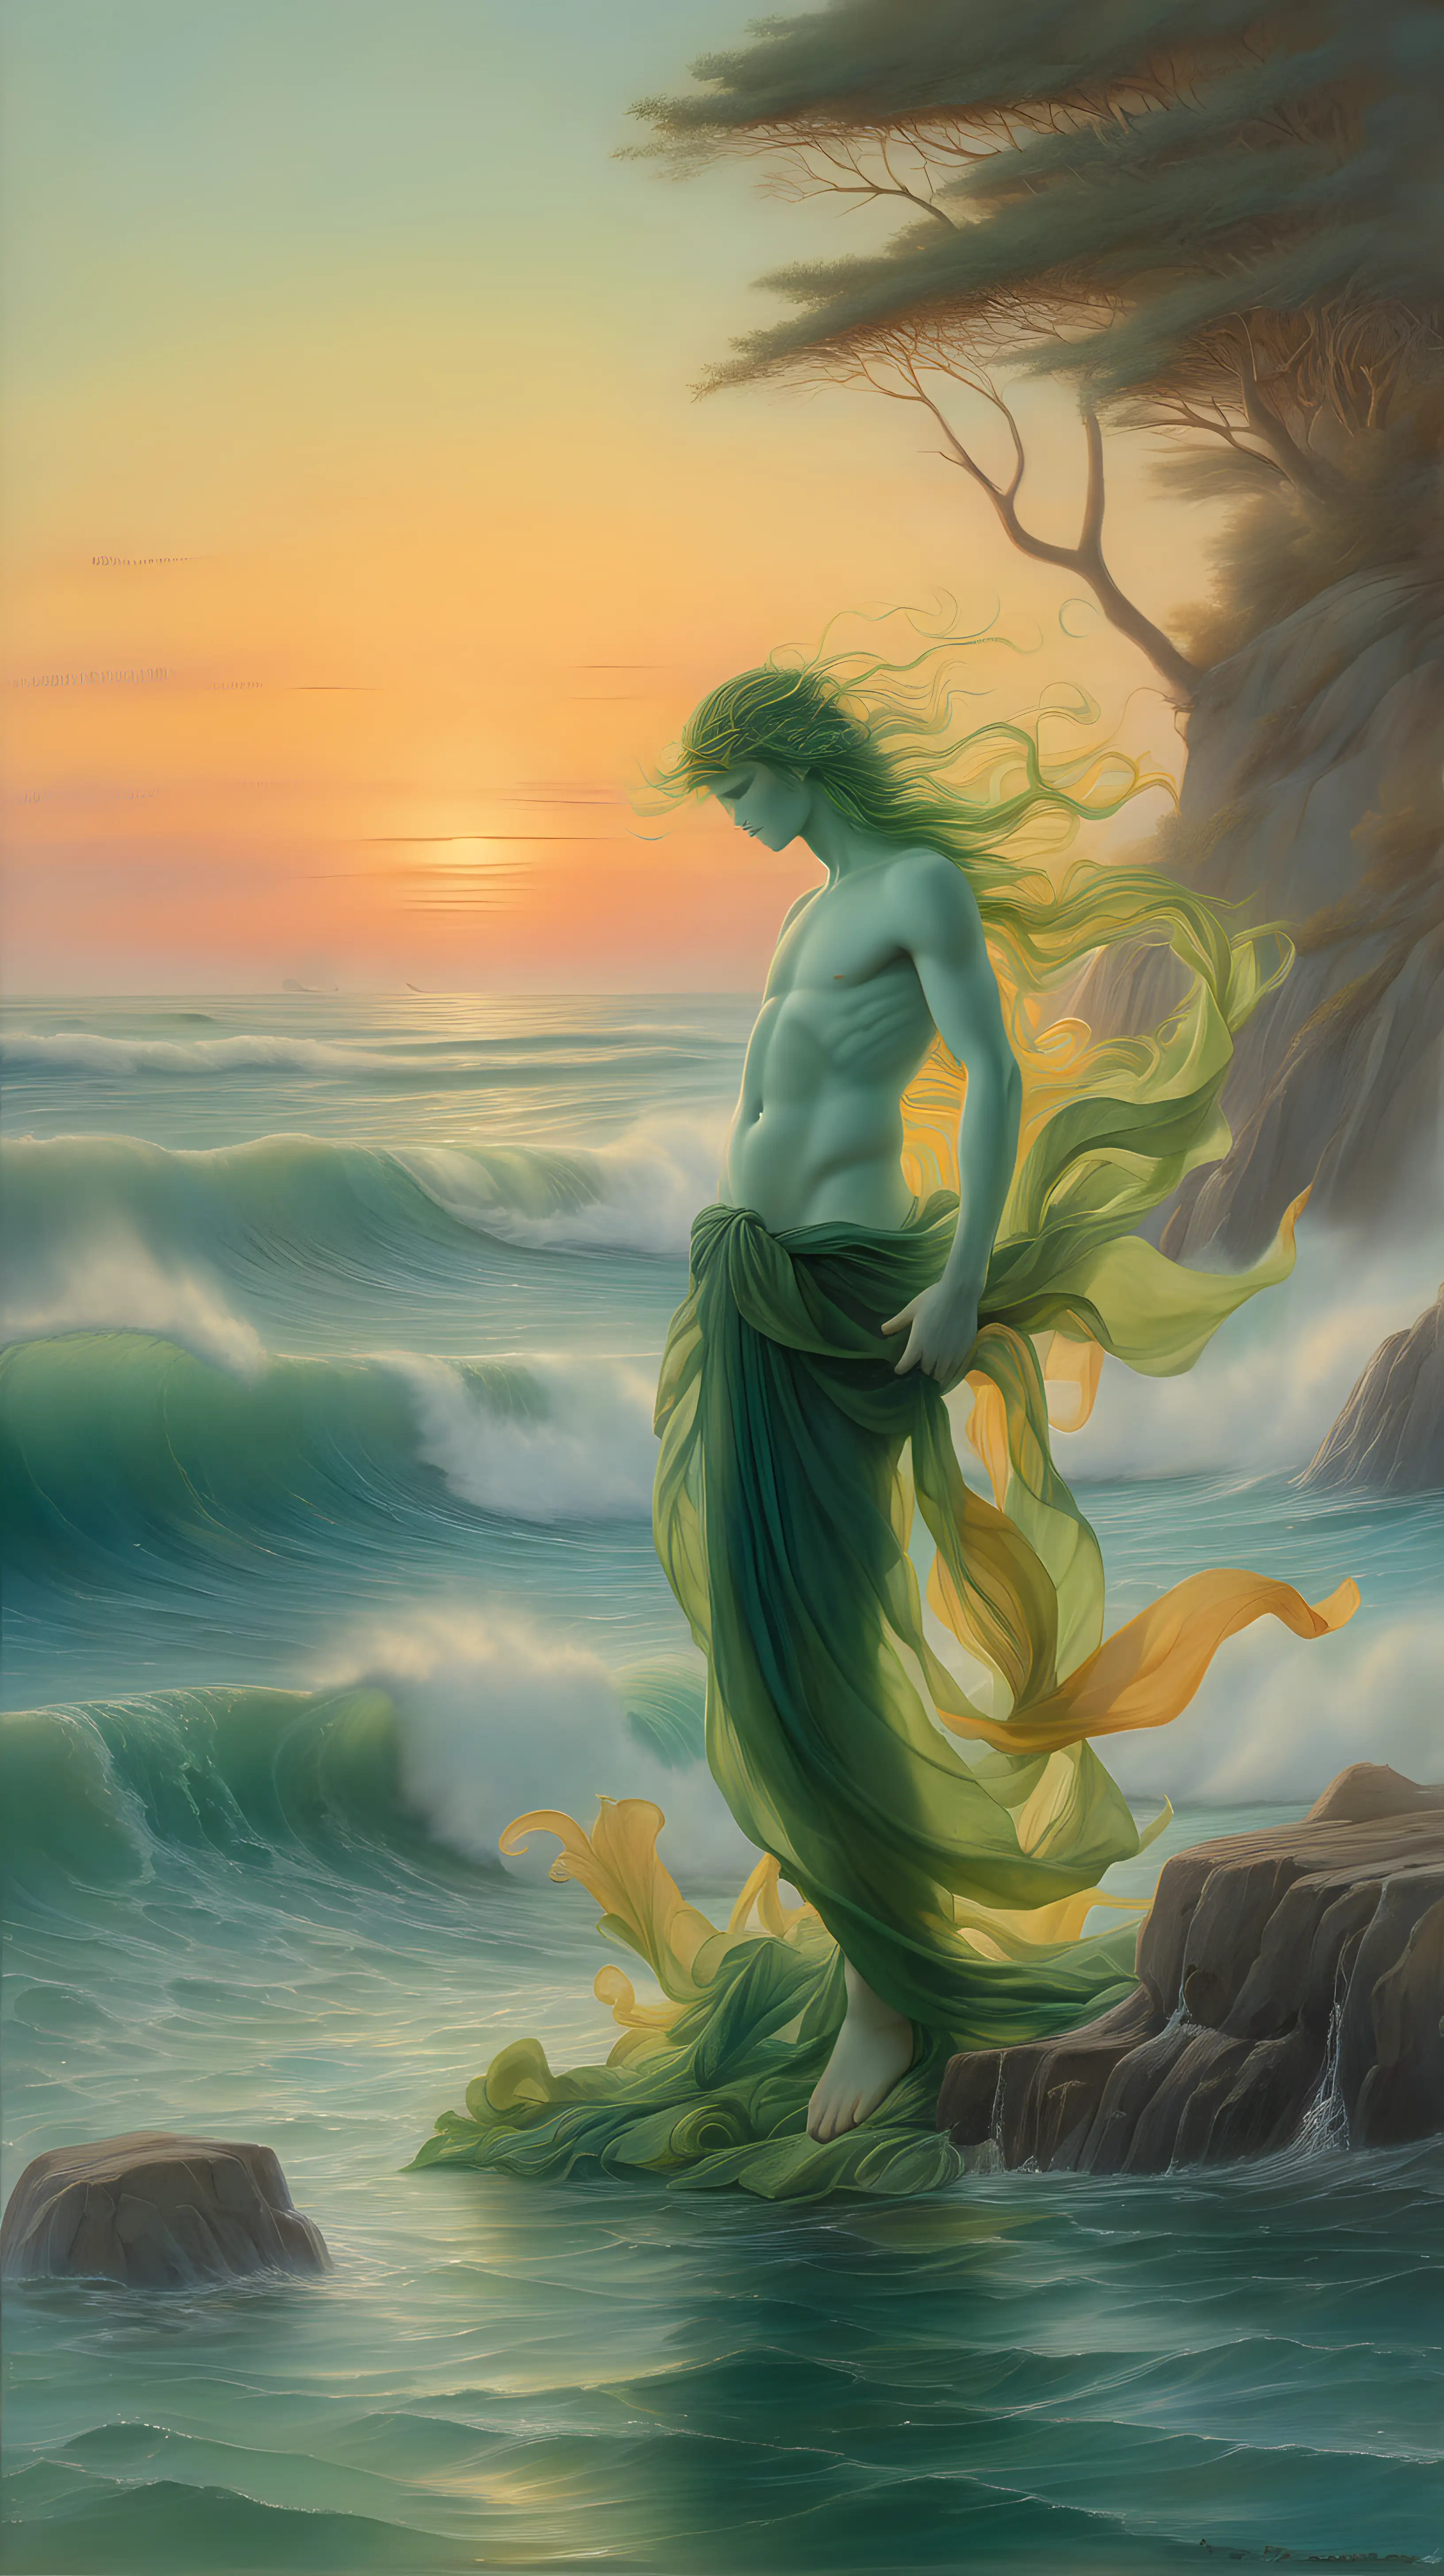 Ethereal Sea Nymph in Flowing LeafLike Garments